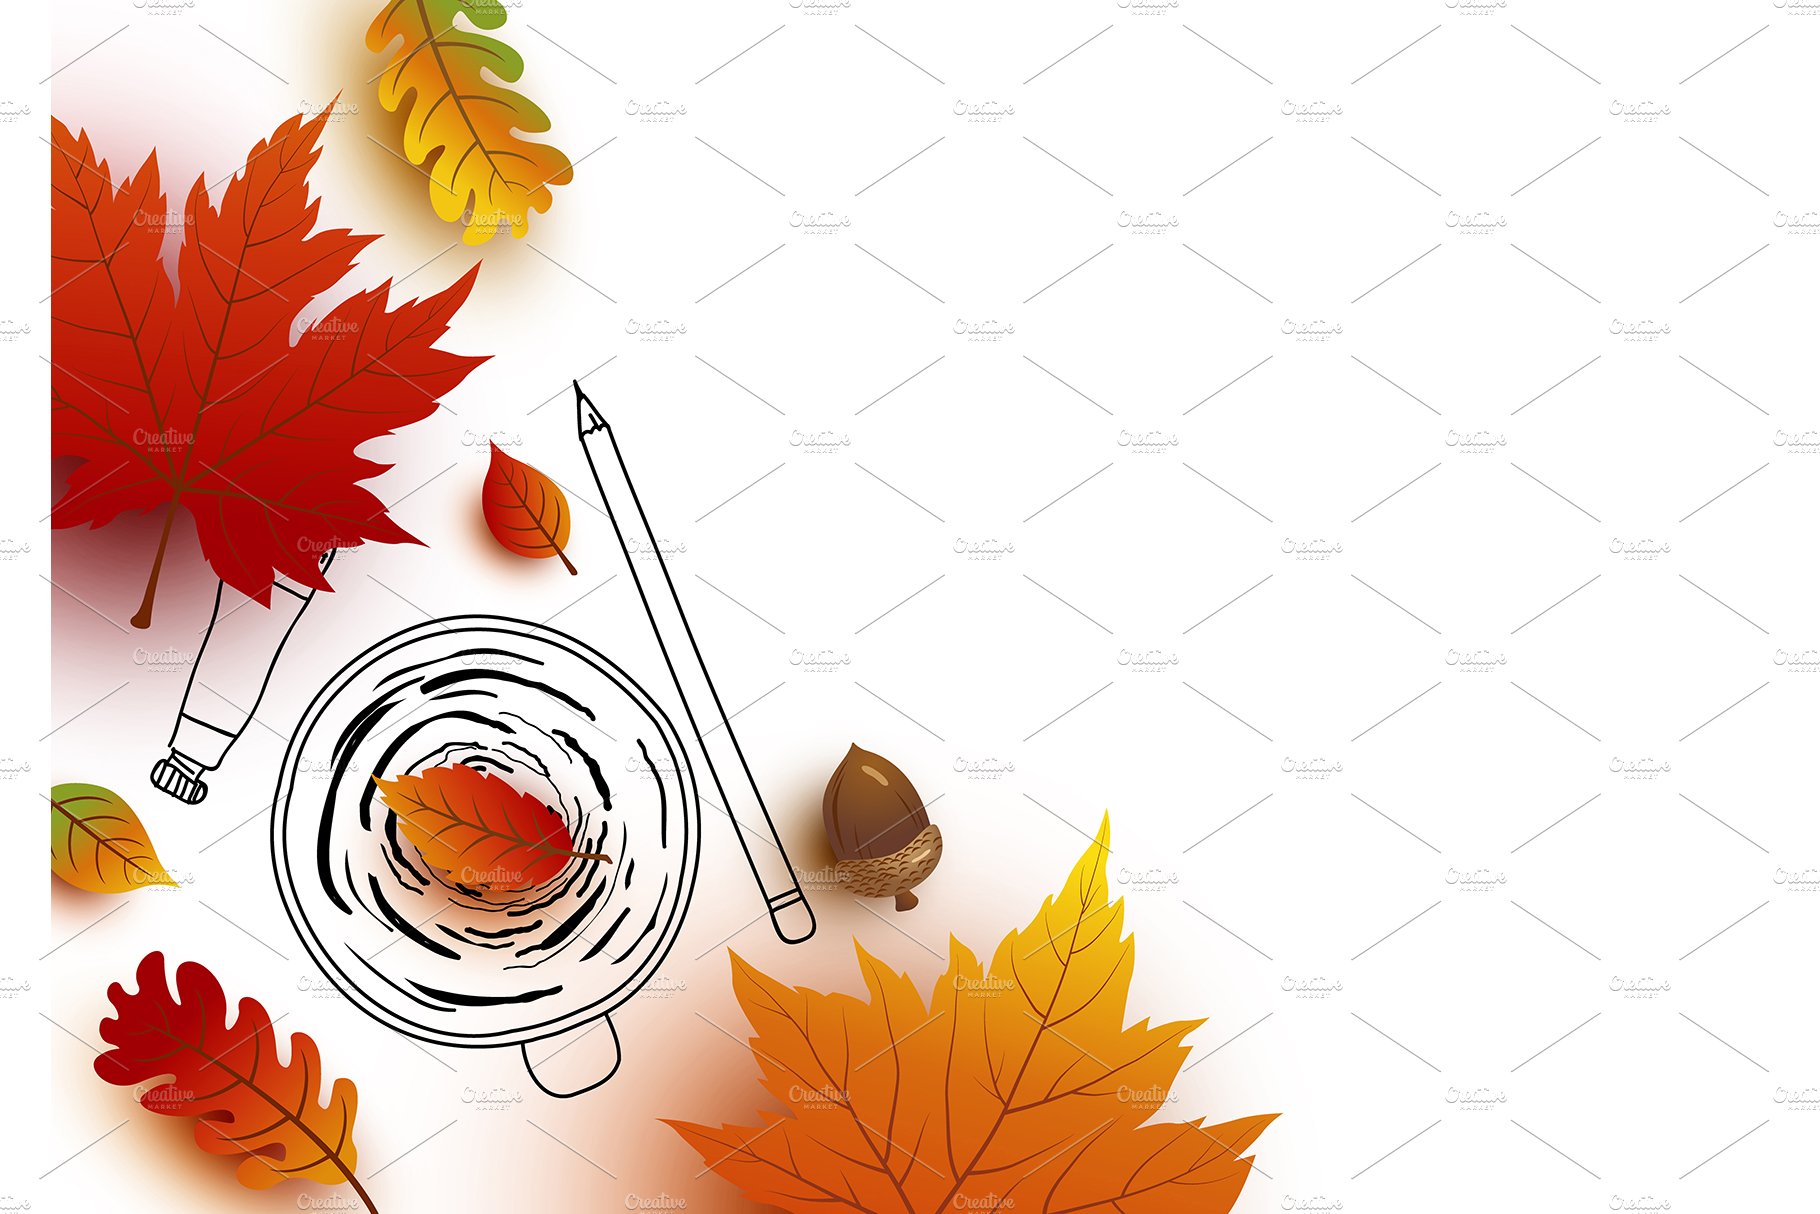 Autumn design with copy space cover image.